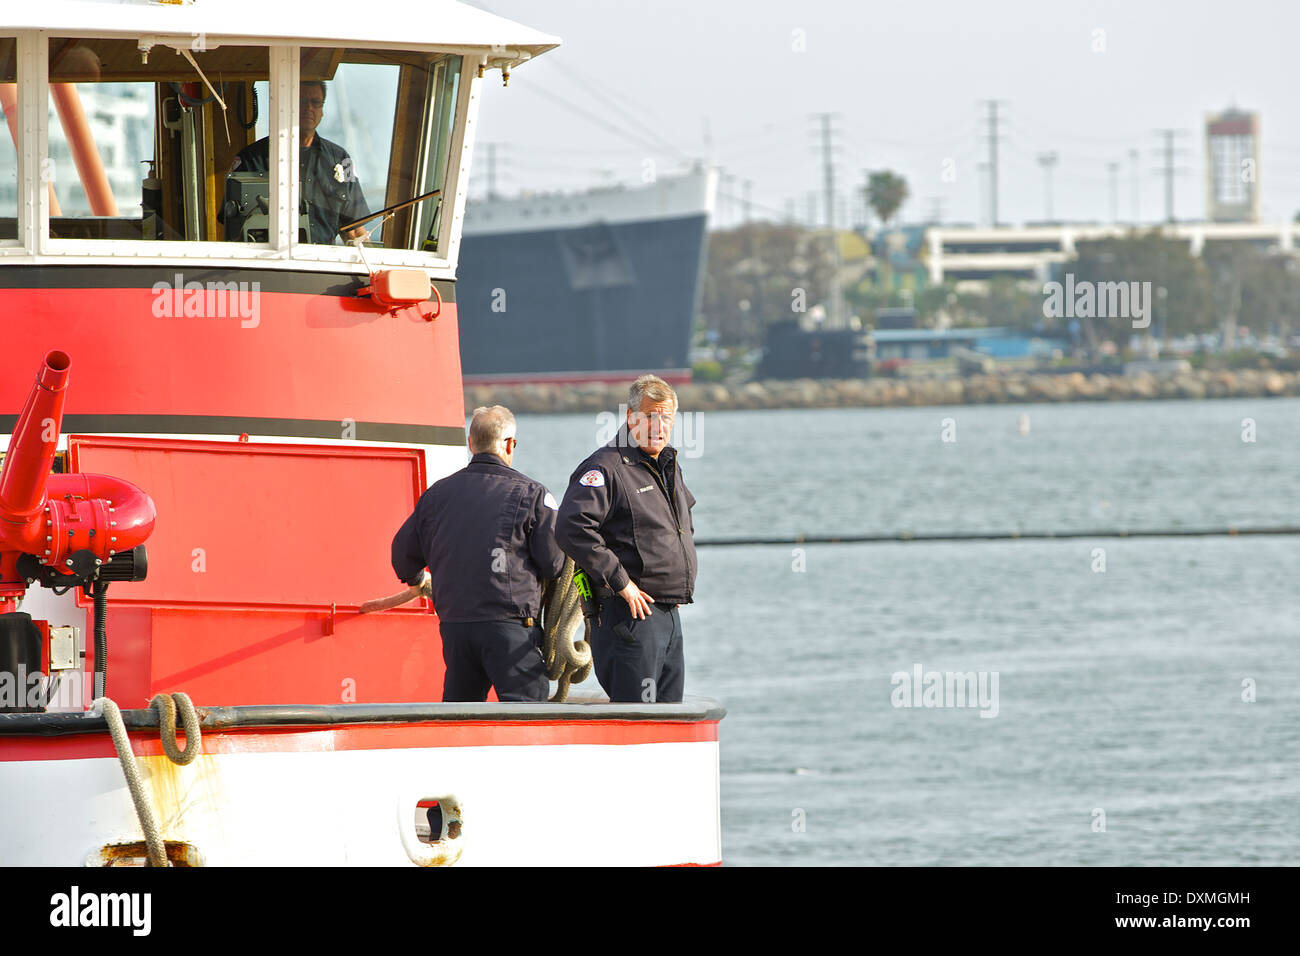 Fireboat 'Challenger' approaches the dock in Rainbow Harbor, Long Beach, California Stock Photo